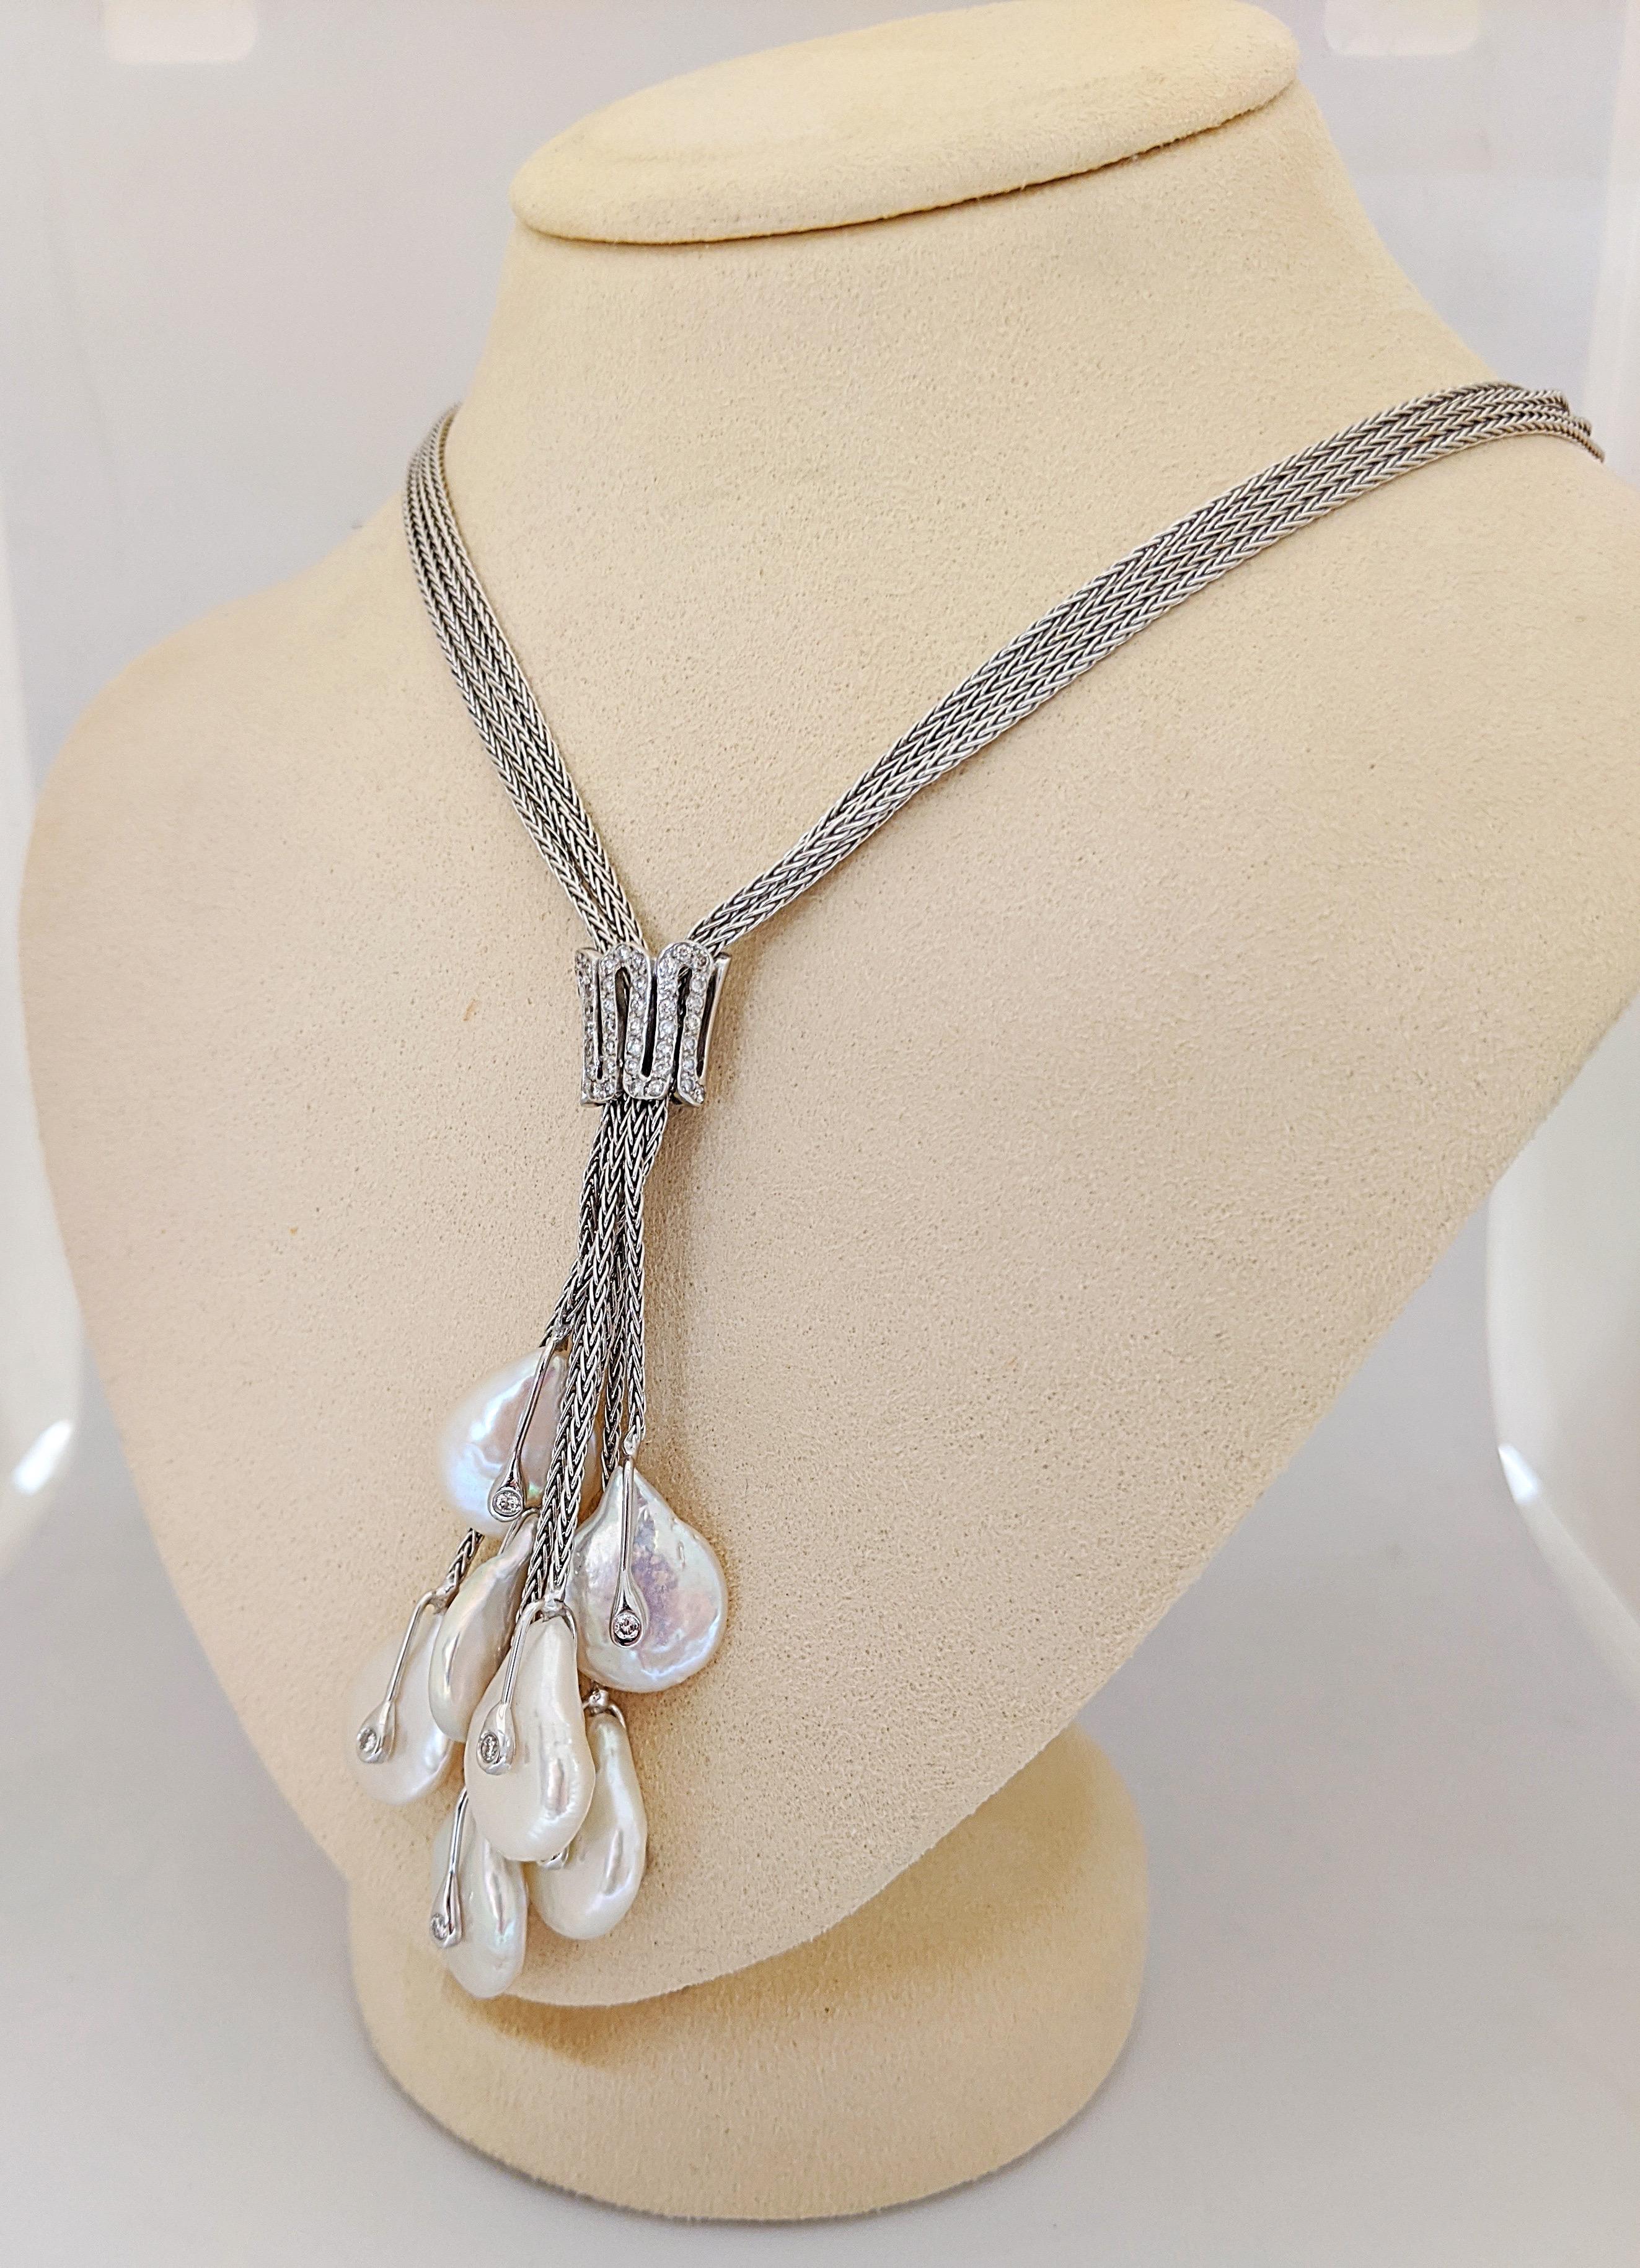 18 karat white gold necklace with seven hanging Freshwater Pearls. Each Pearl is accented with a bezel set Diamond. The Pearls hang from a four strand necklace held with a Diamond enhancer. The necklace measures 23